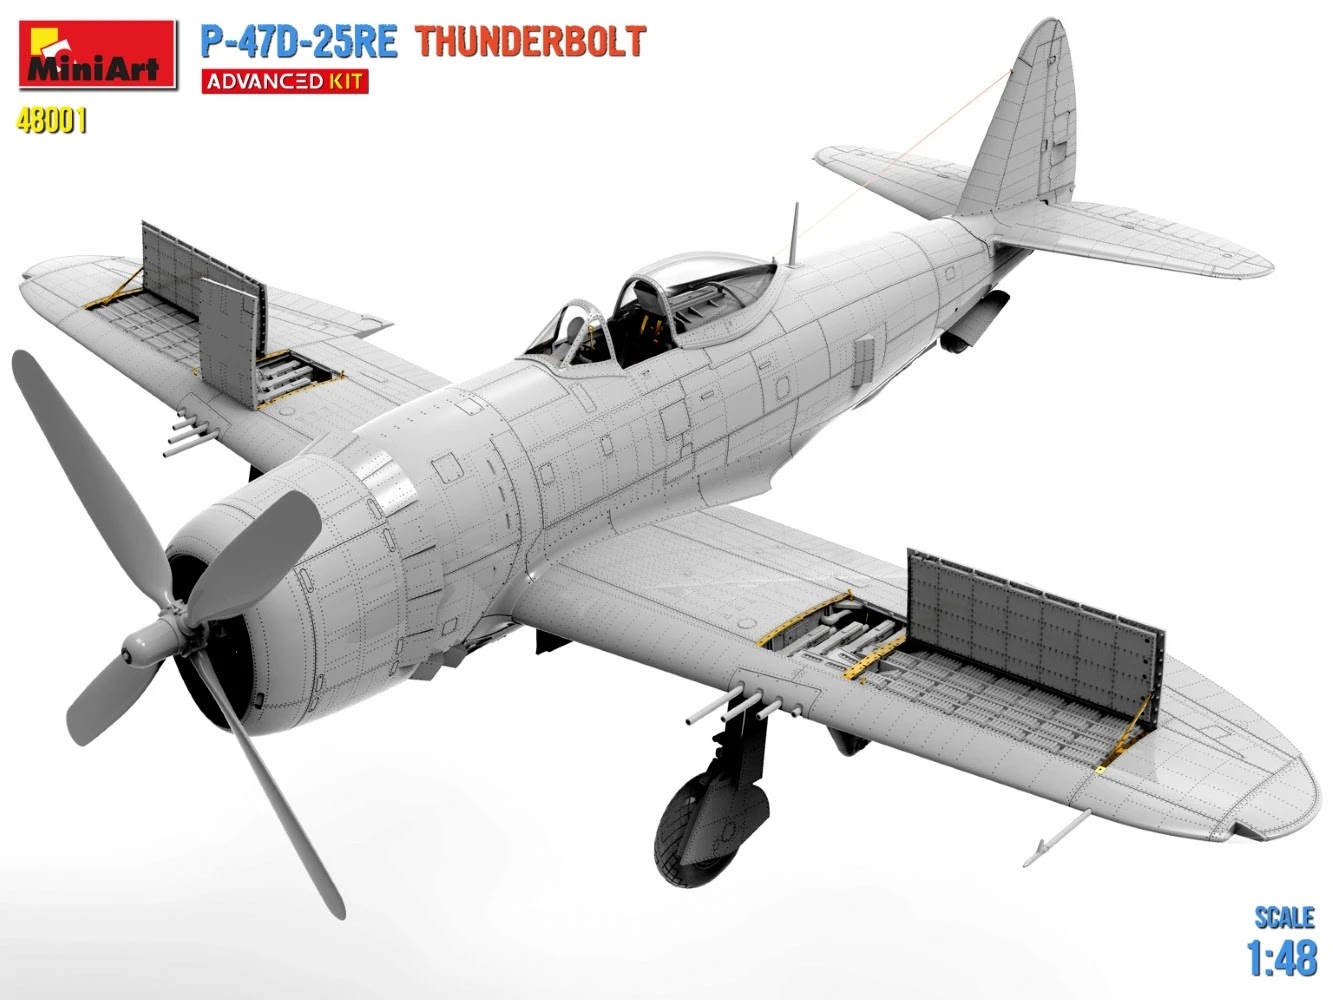 MiniArt ups the detail on their P-47D CAD-1